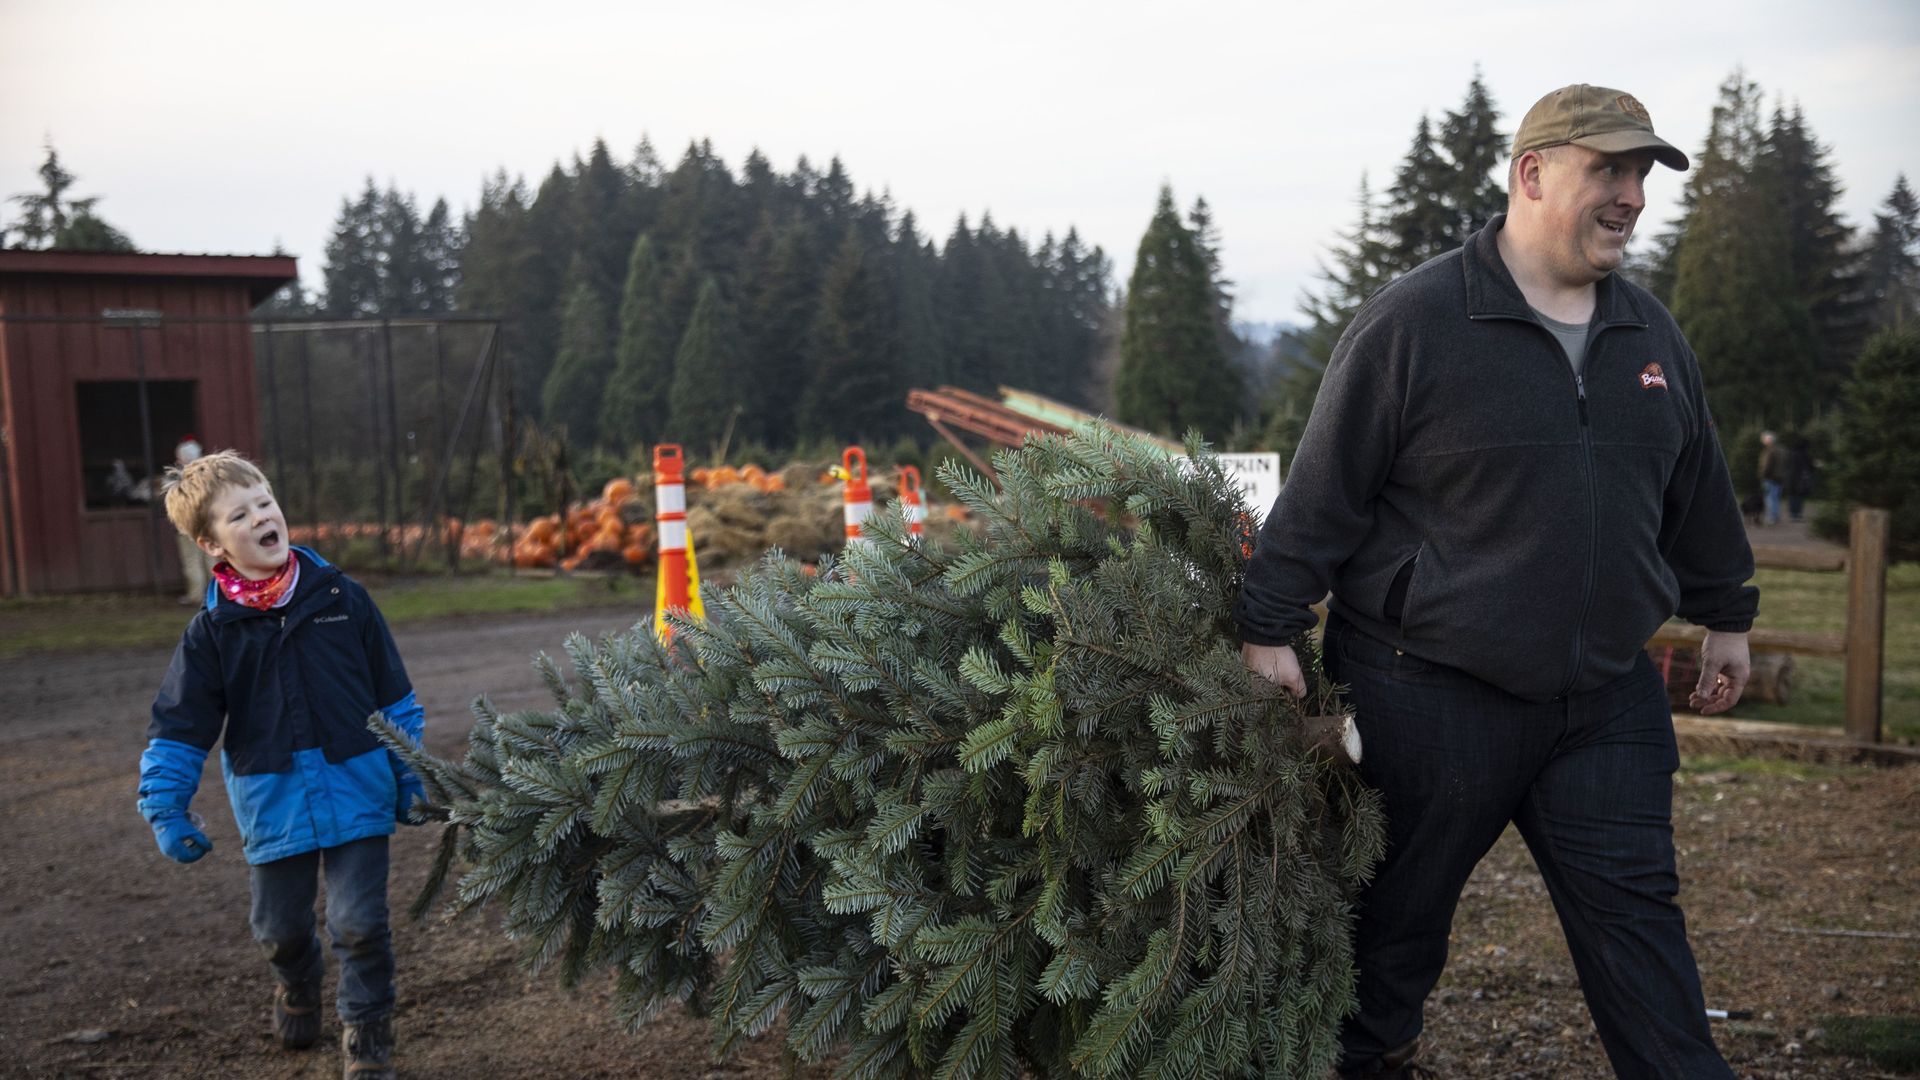 Tim Daley and his son, Jacob, 9, carry their freshly cut Christmas tree last weekend at Lee Farms in Tualatin, Ore. Photo: Paula Bronstein/AP